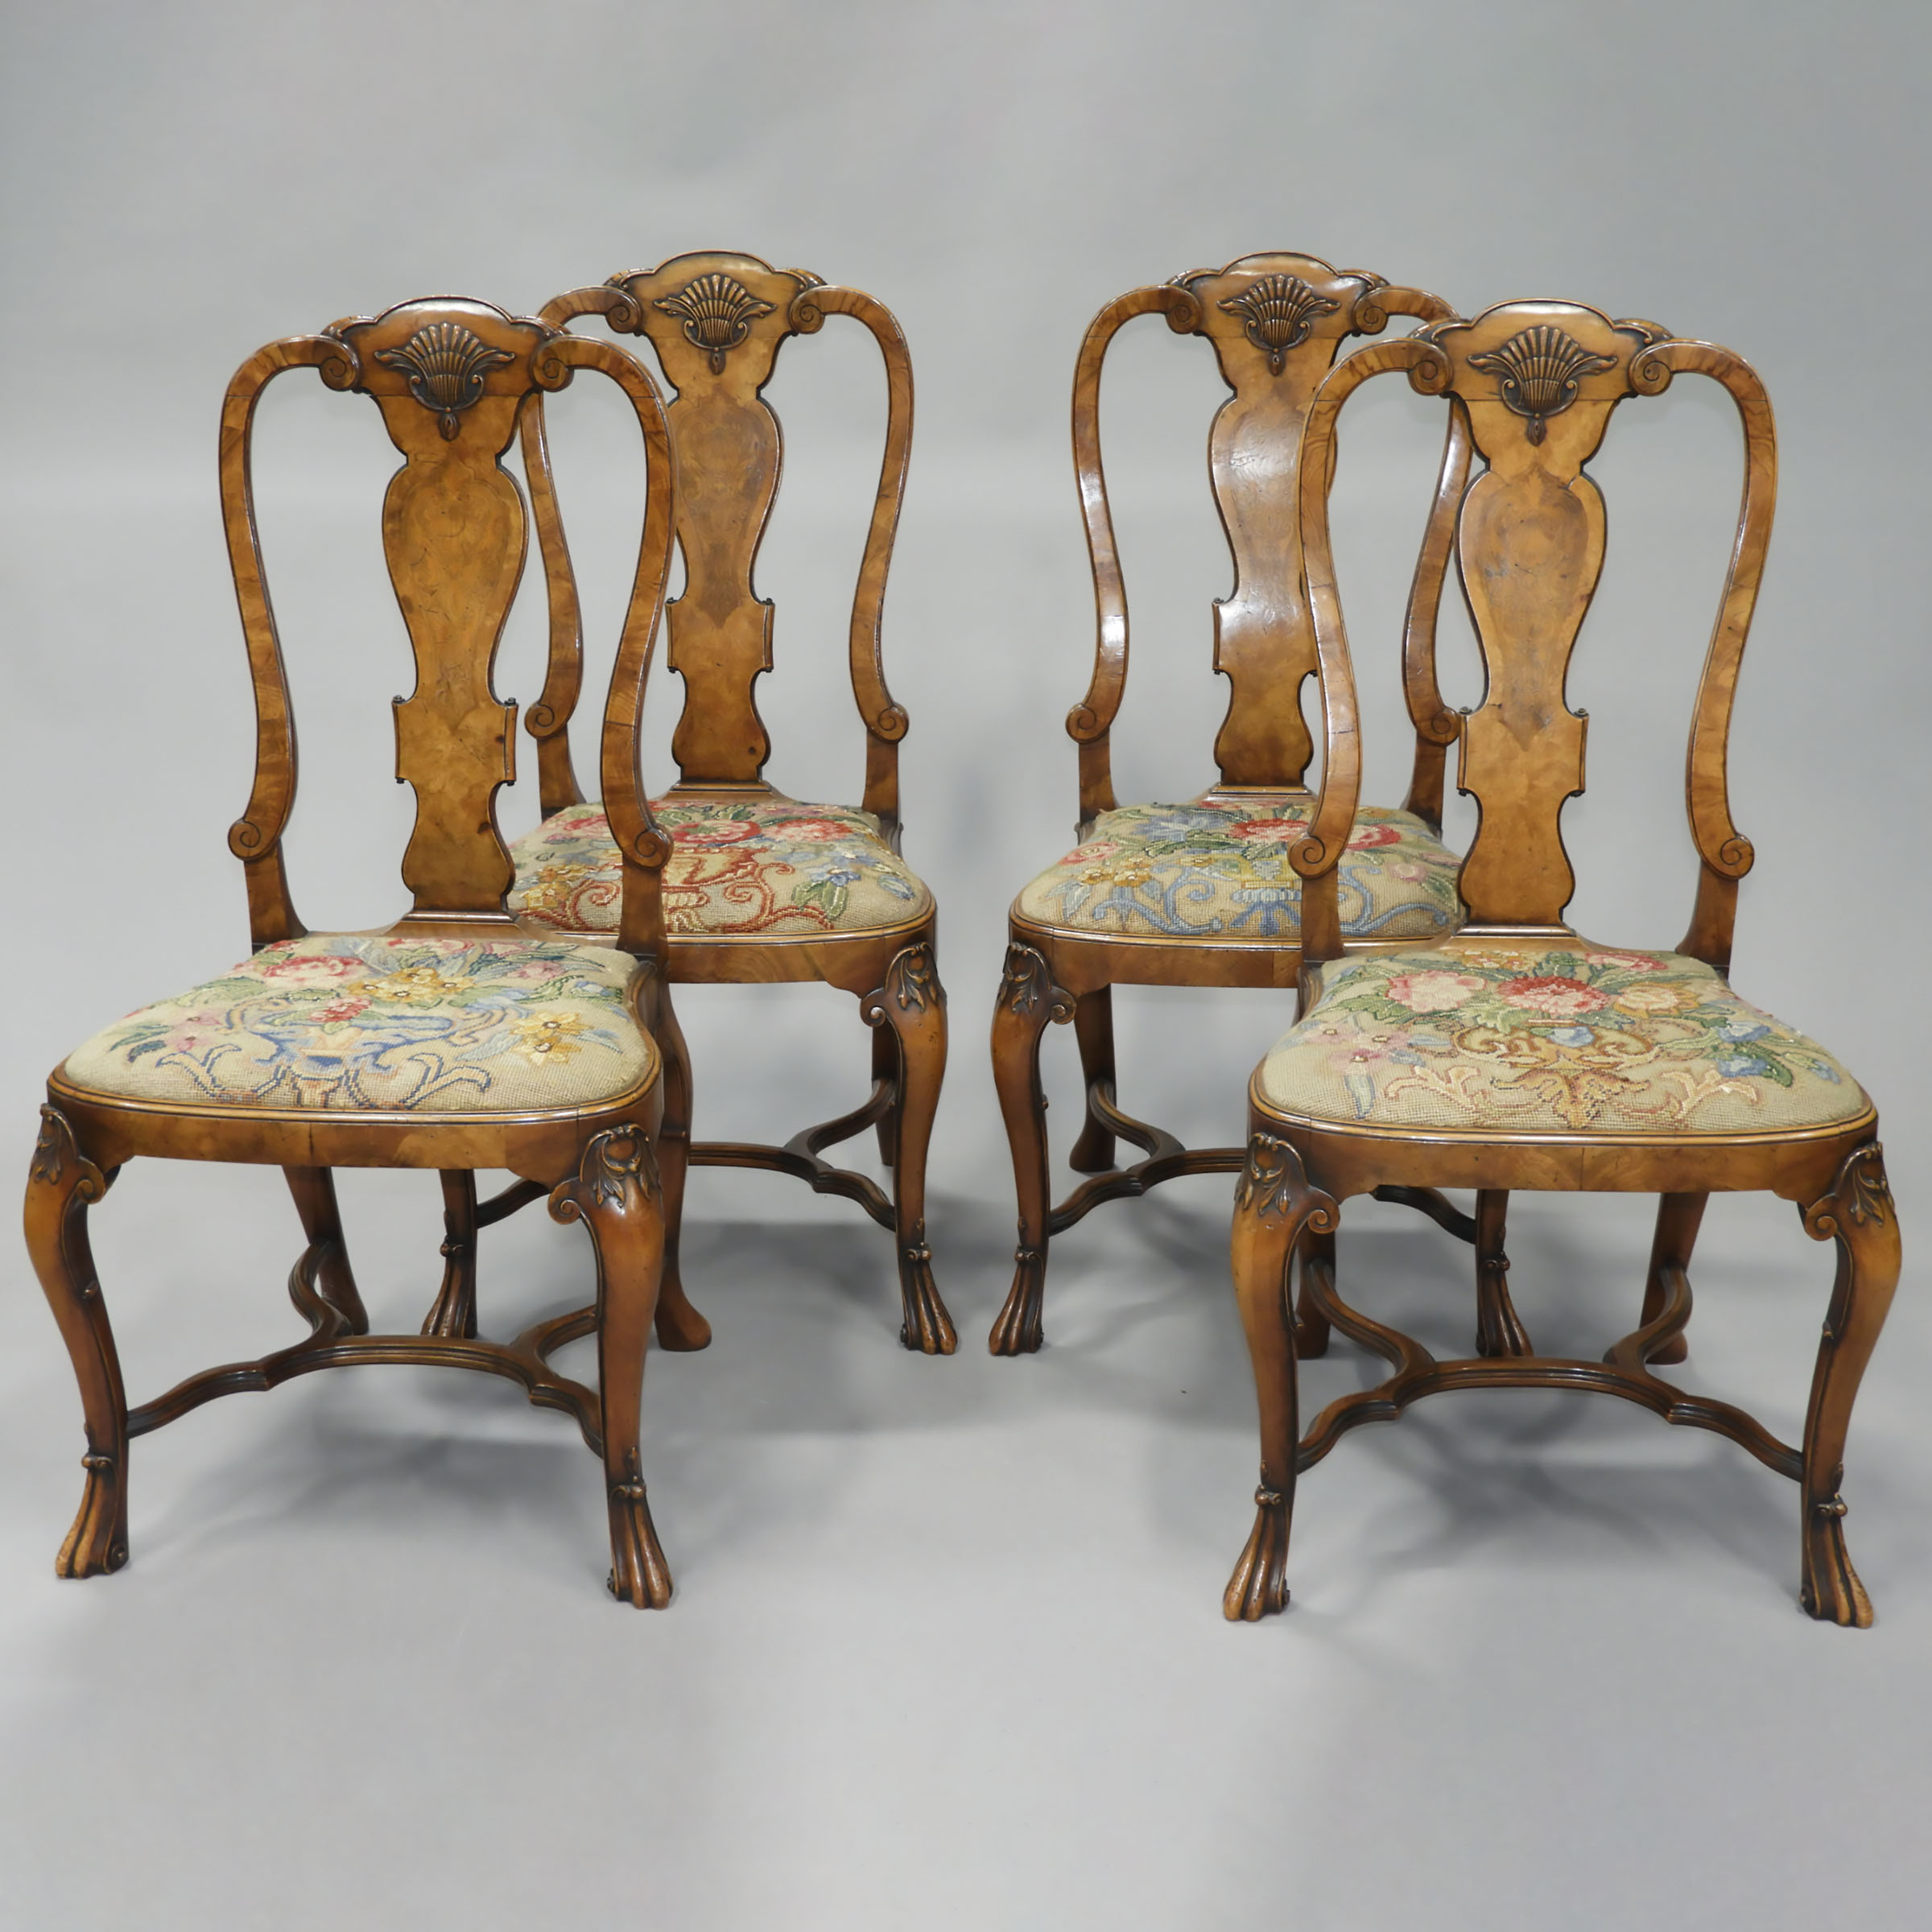 Set of Four Dutch Queen Anne Style Carved and Inlaid Burl Walnut Side Chairs, 19th century